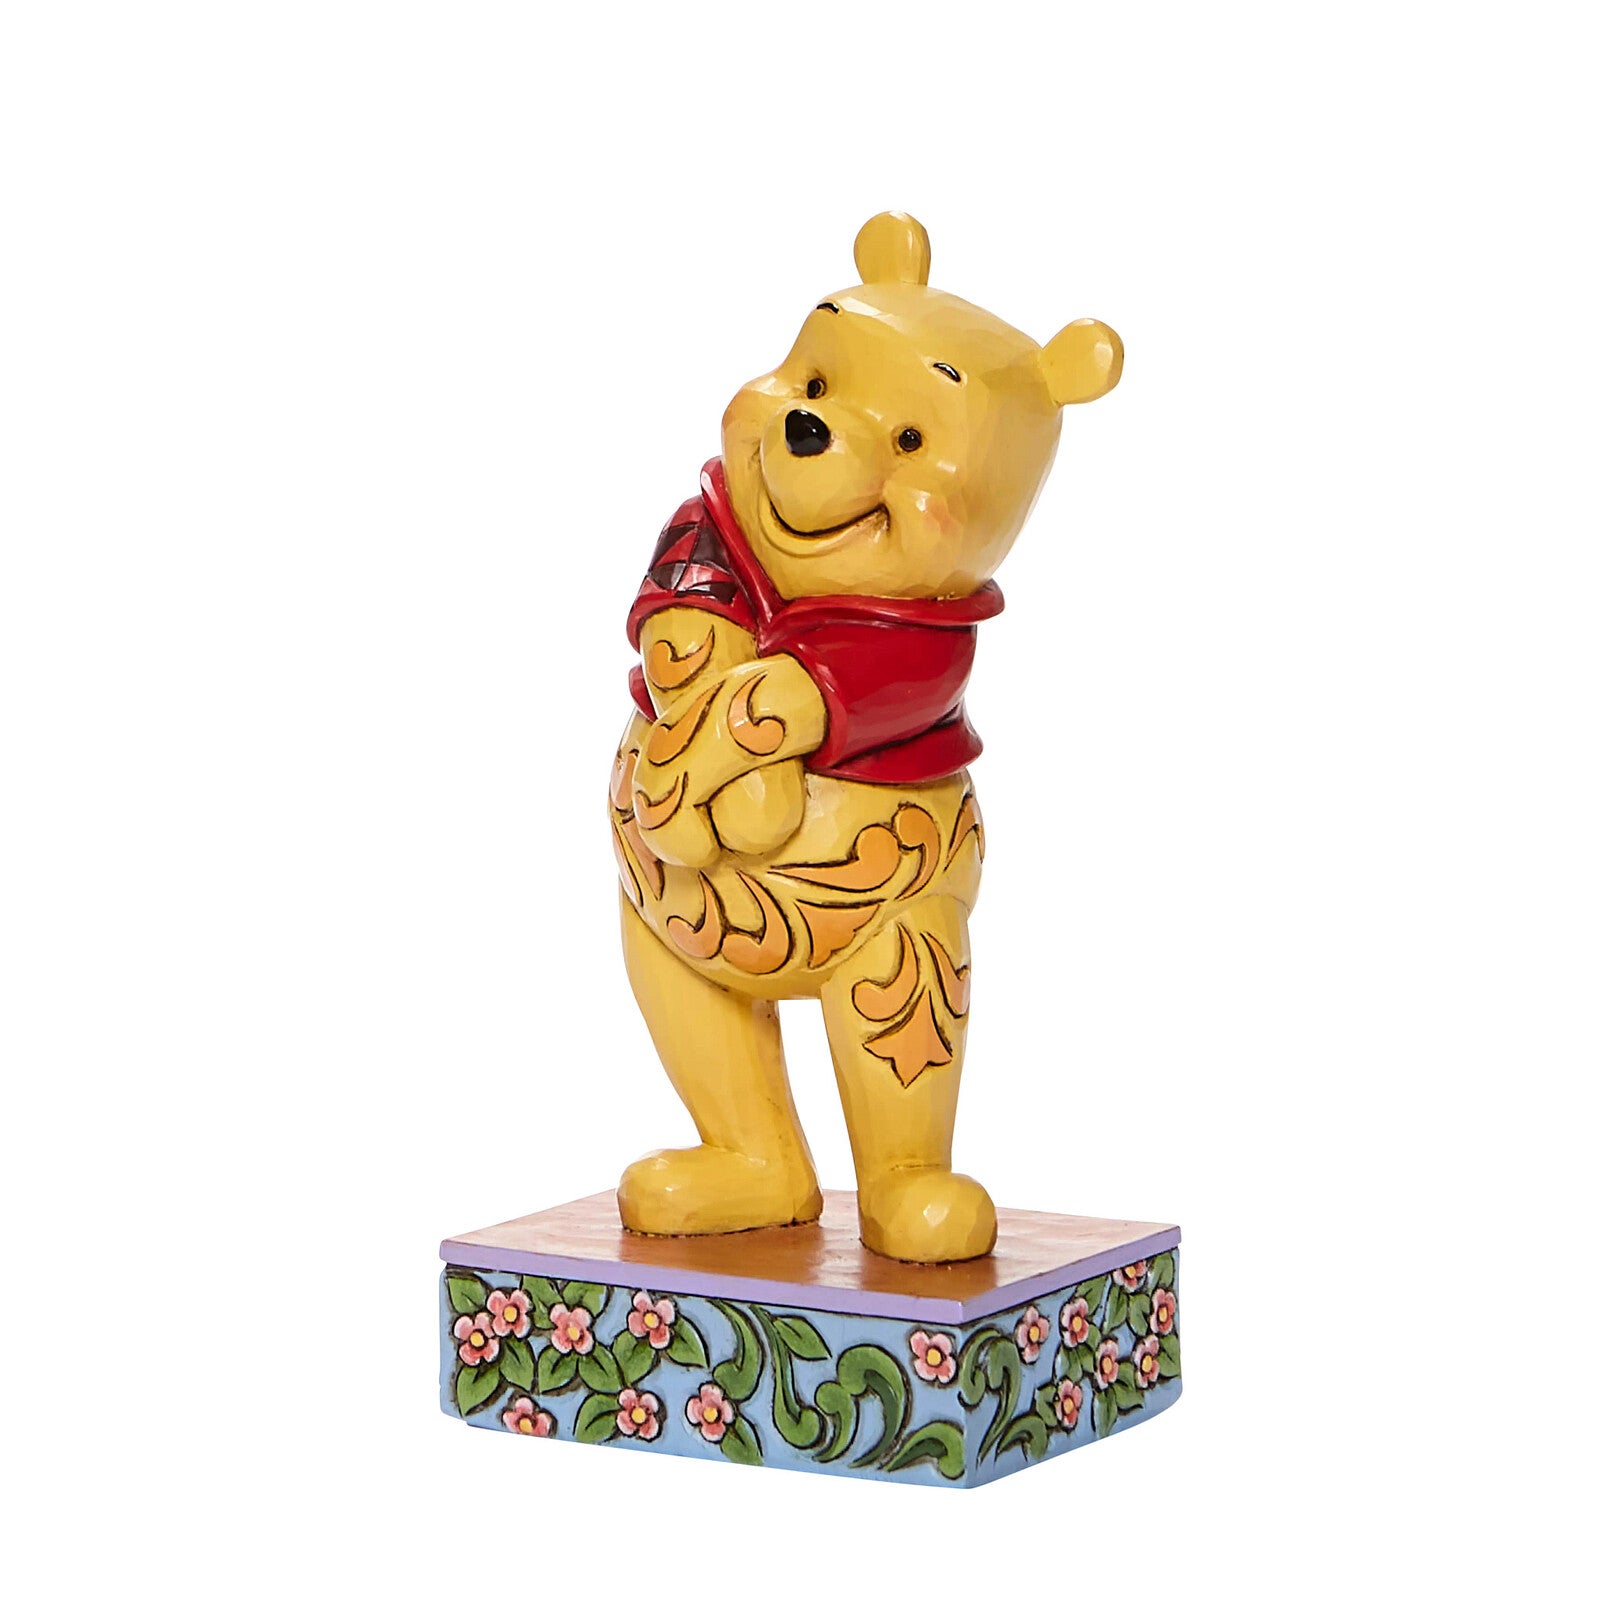 DISNEY TRADITIONS WINNIE THE POOH STANDING BELOVED BEAR - Gifts R Us